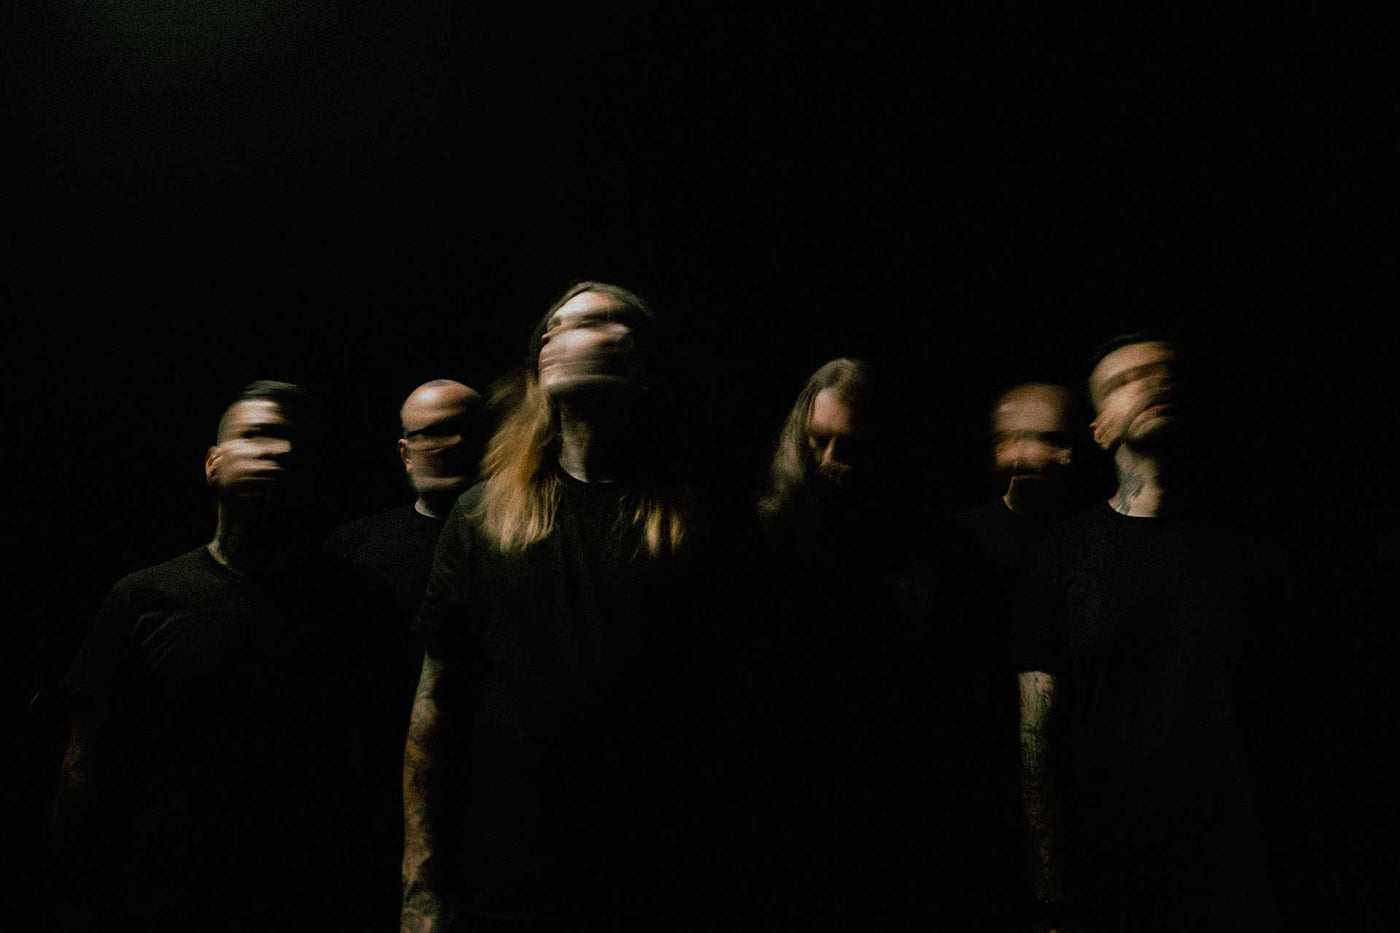 Fit For An Autopsy Promo Photo - Band members in all black with motion blur faces